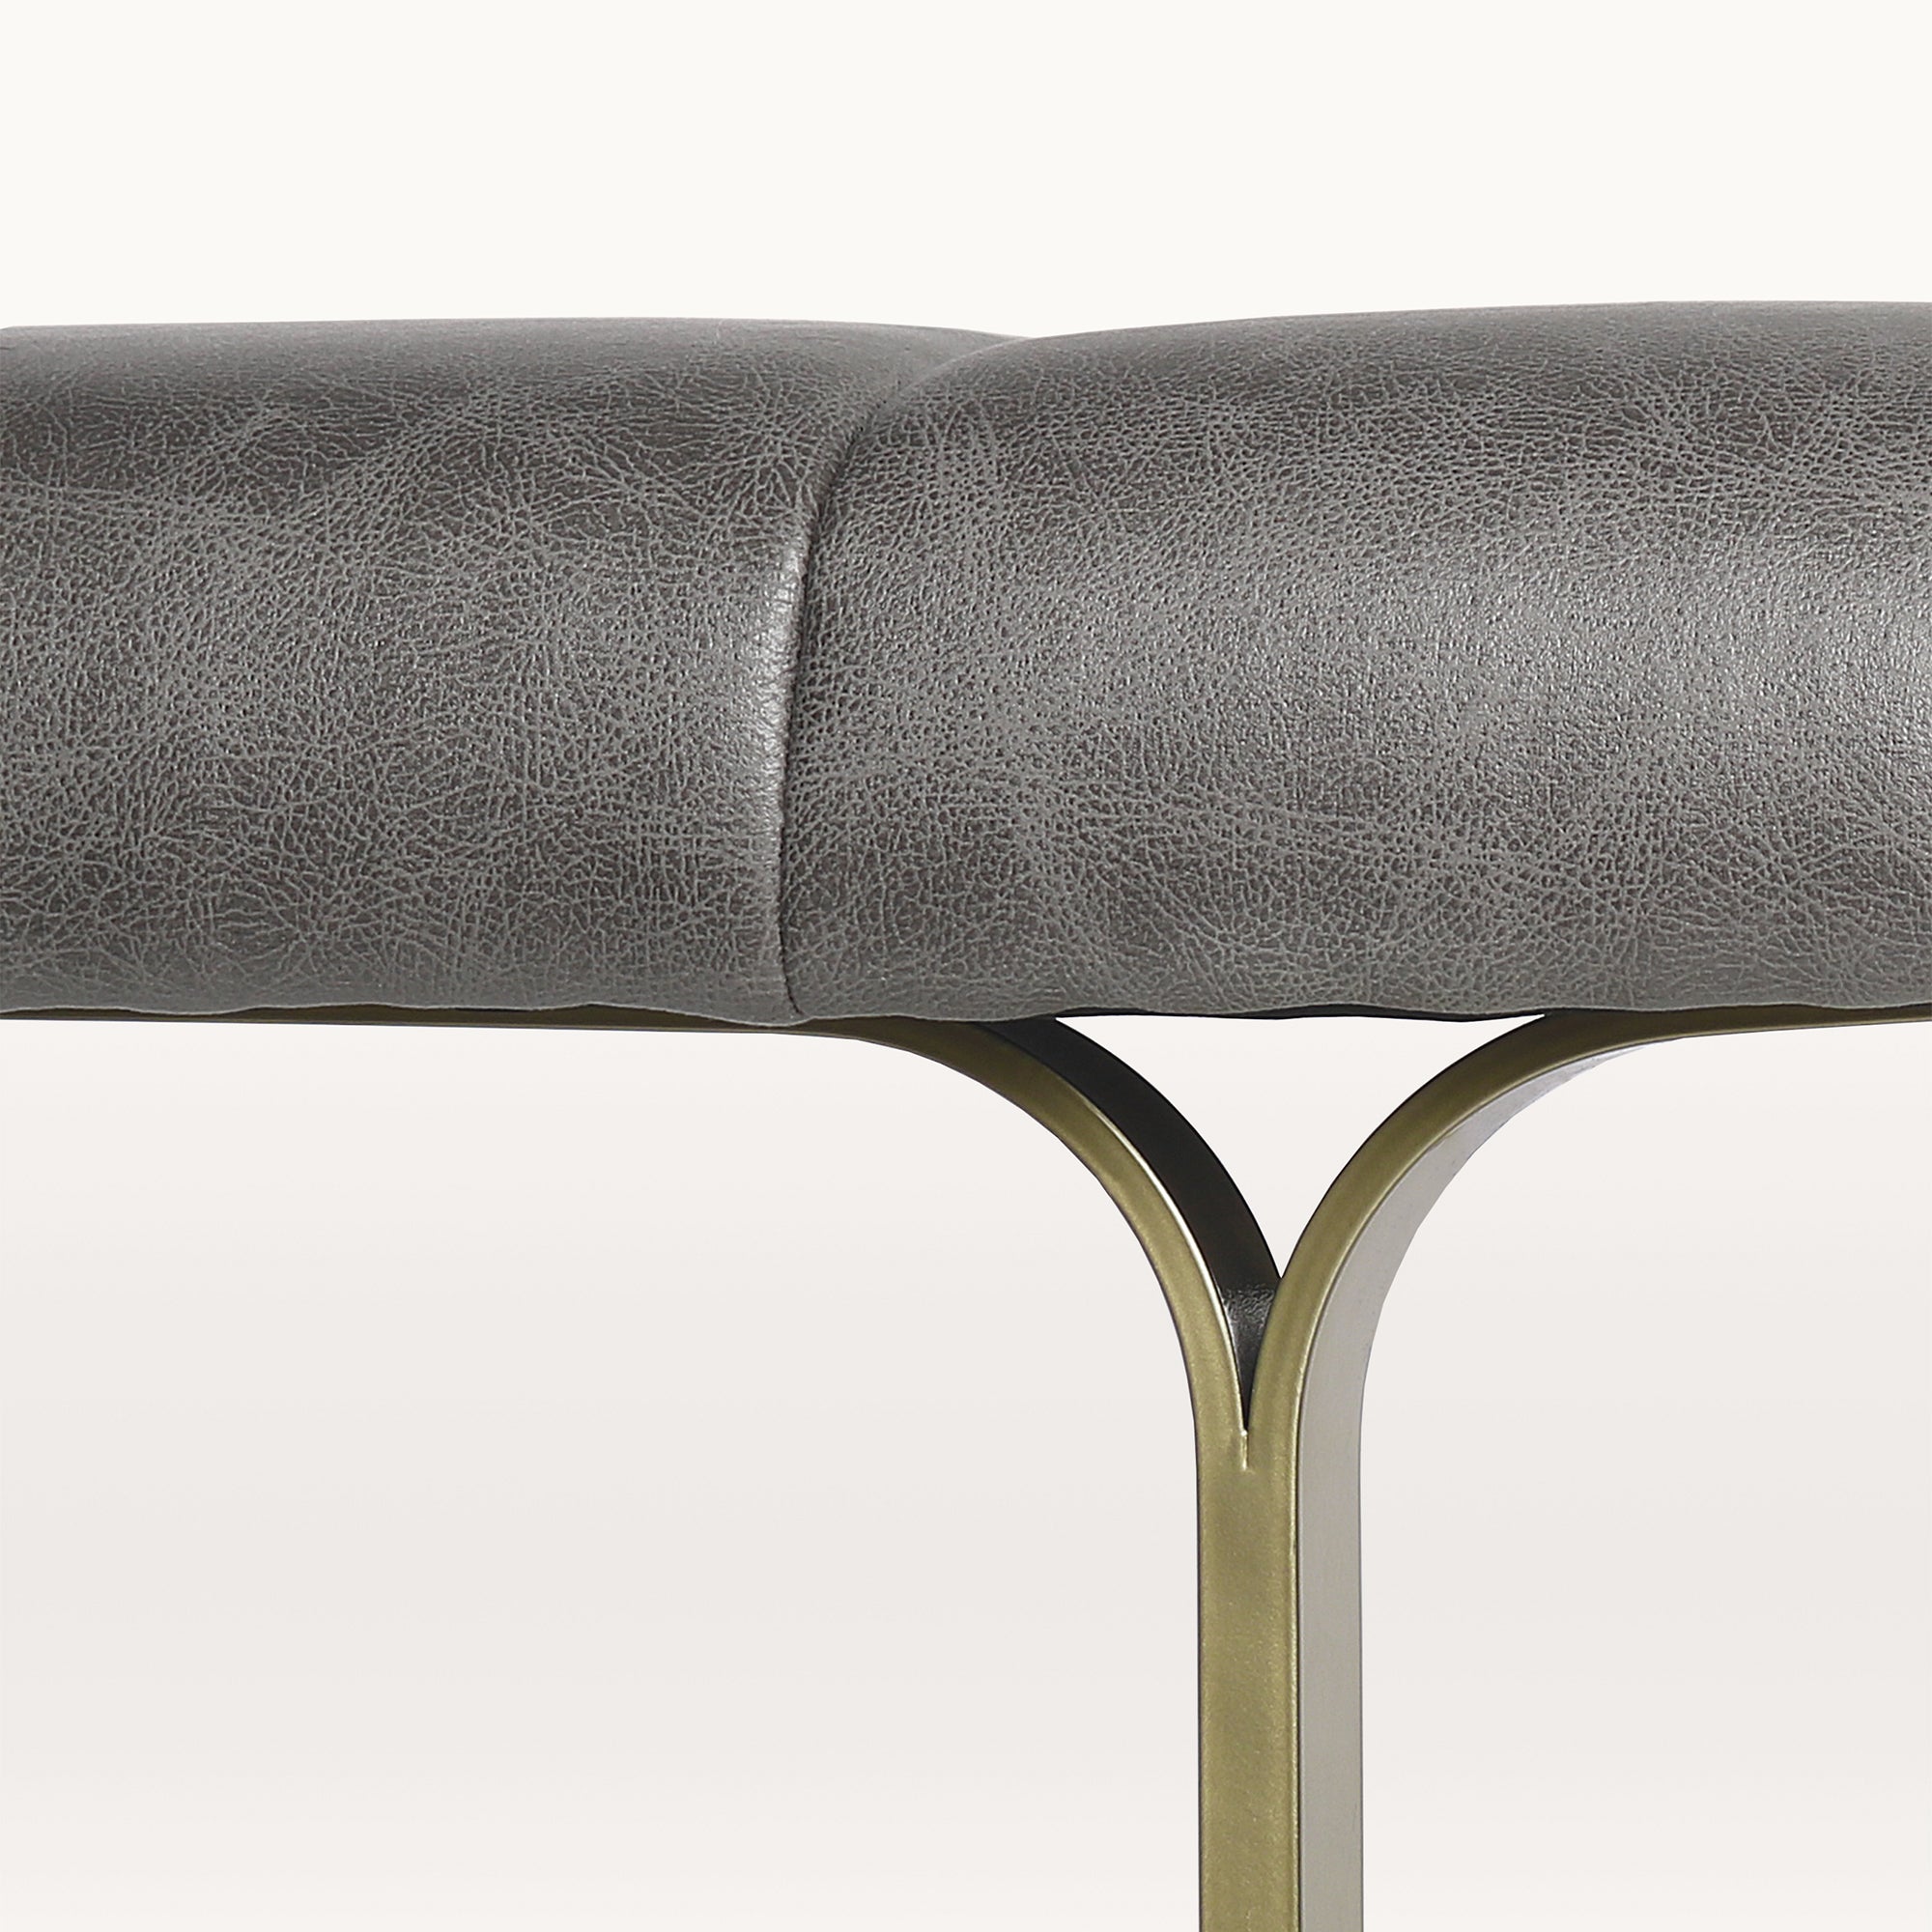 A Upholstered Leather Coffee Table with Metal Base